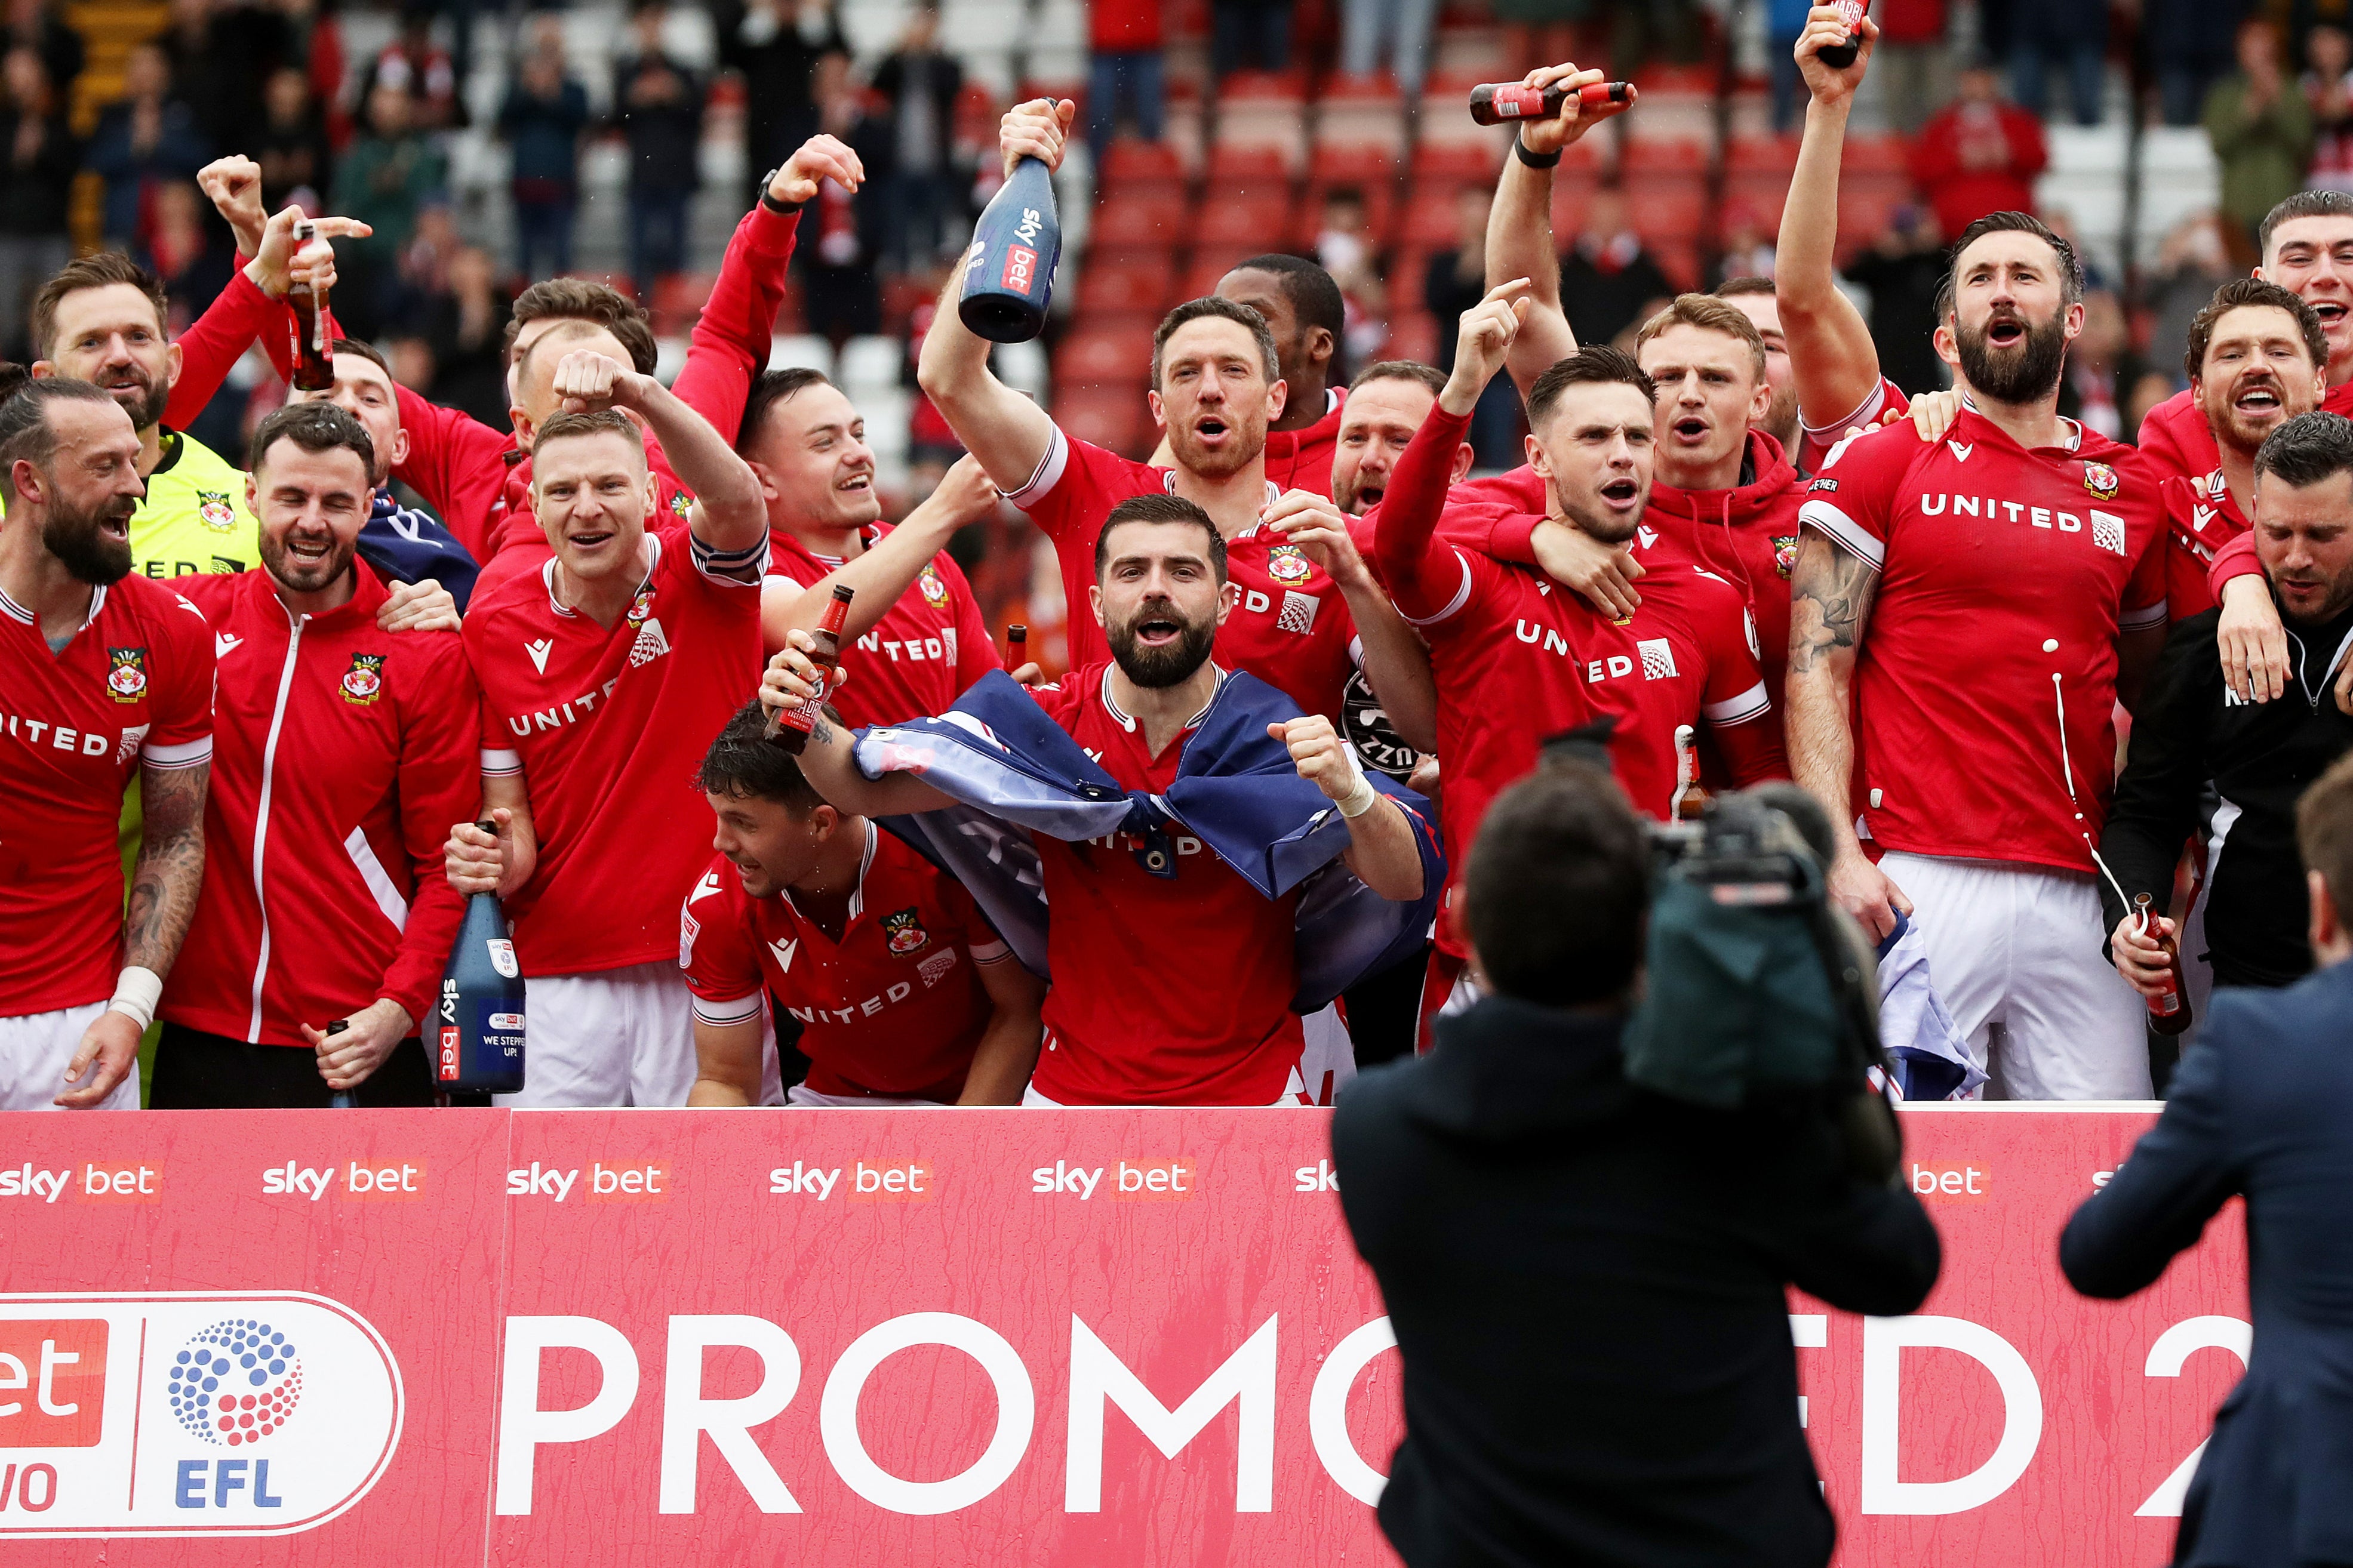 Wrexham earned promotion from League Two to climb into the third tier